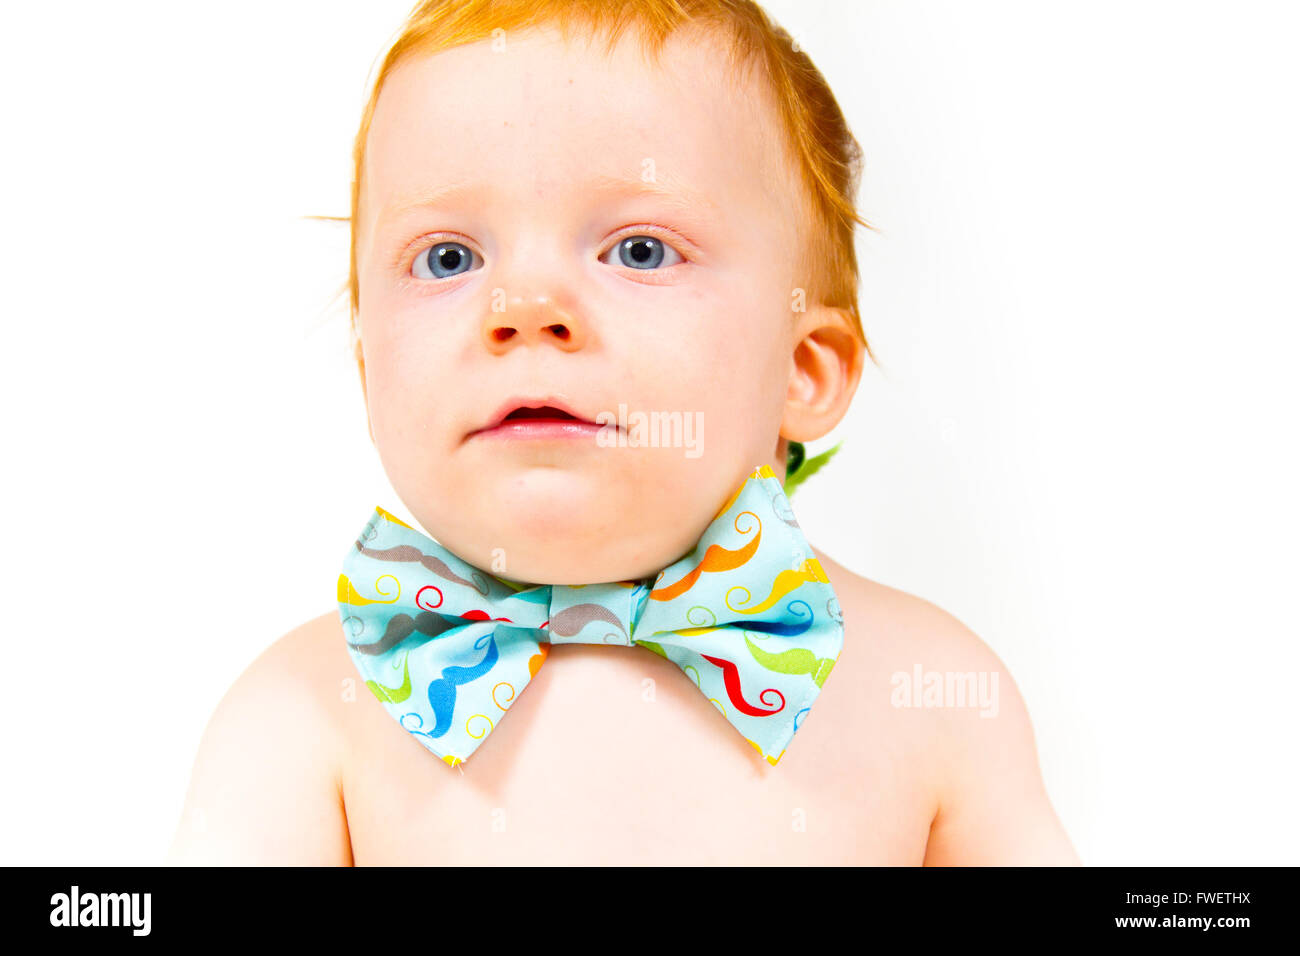 A one year old baby boy in the studio with a white background. The kid is wearing a bowtie and a diaper. Stock Photo